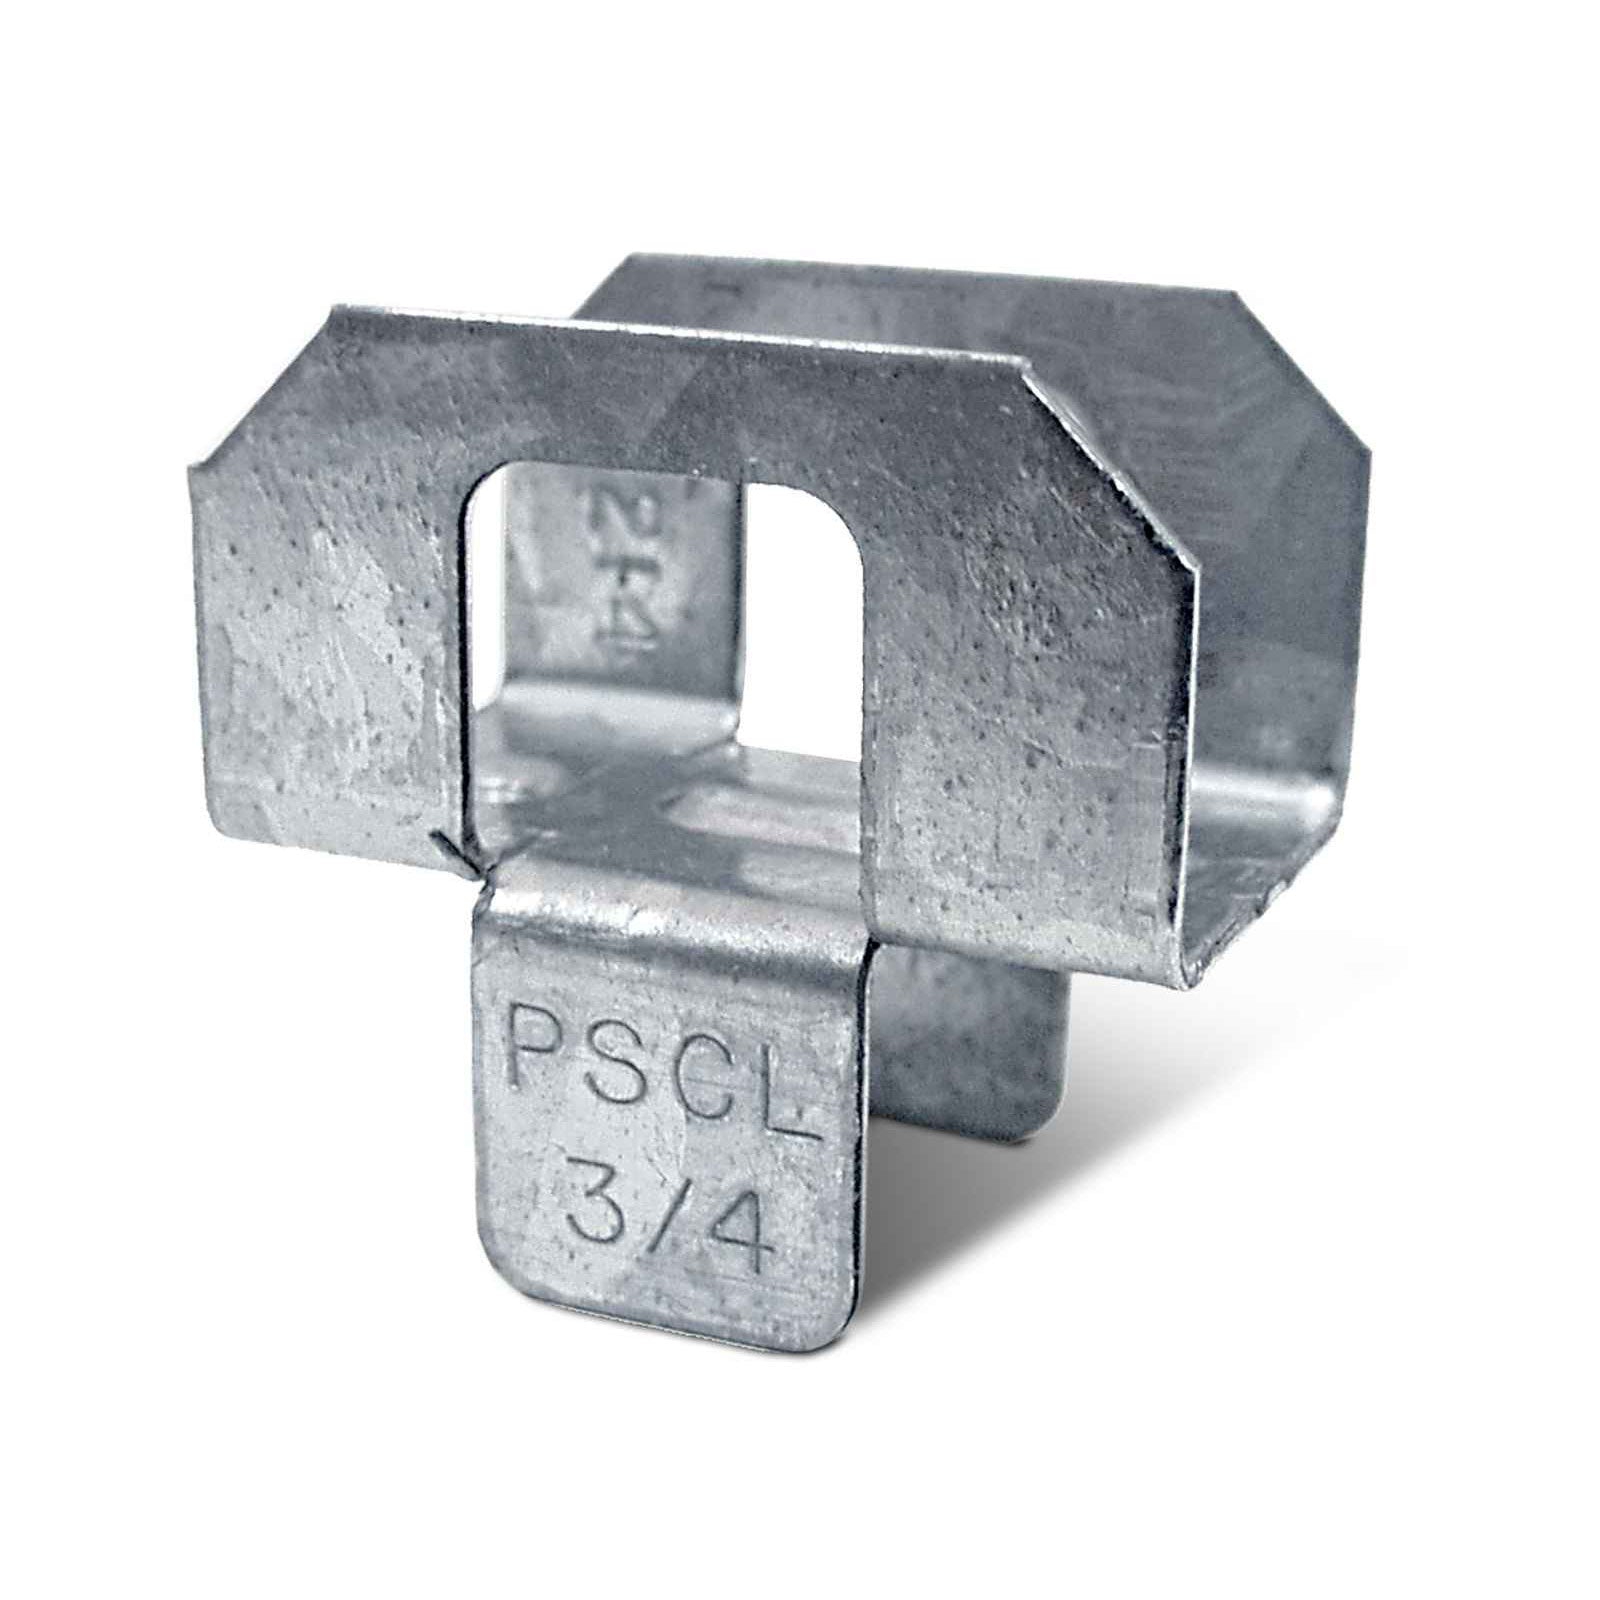 Simpson PSCL-3/4R50 - 3/4" Plywood Sheathing Clips